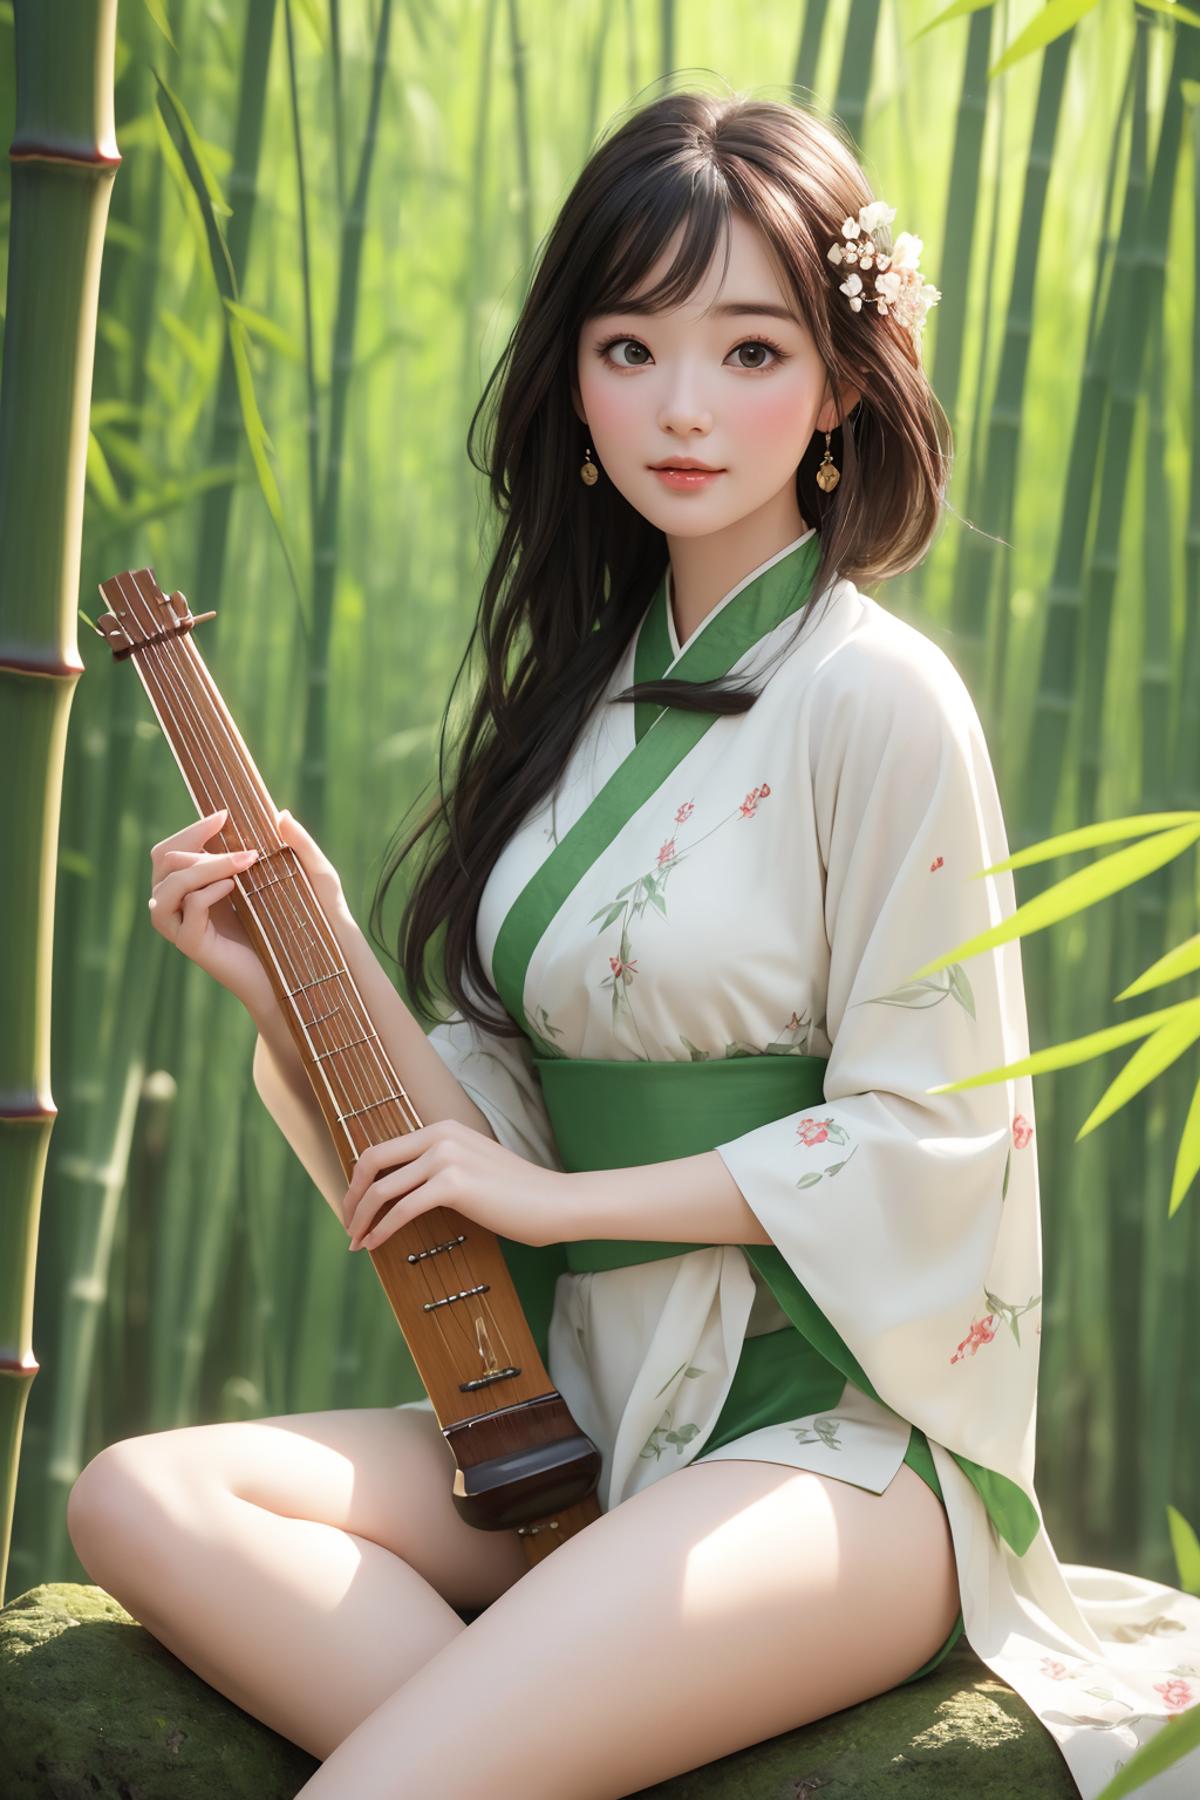 Cute girl in the bamboo forest image by joyy114